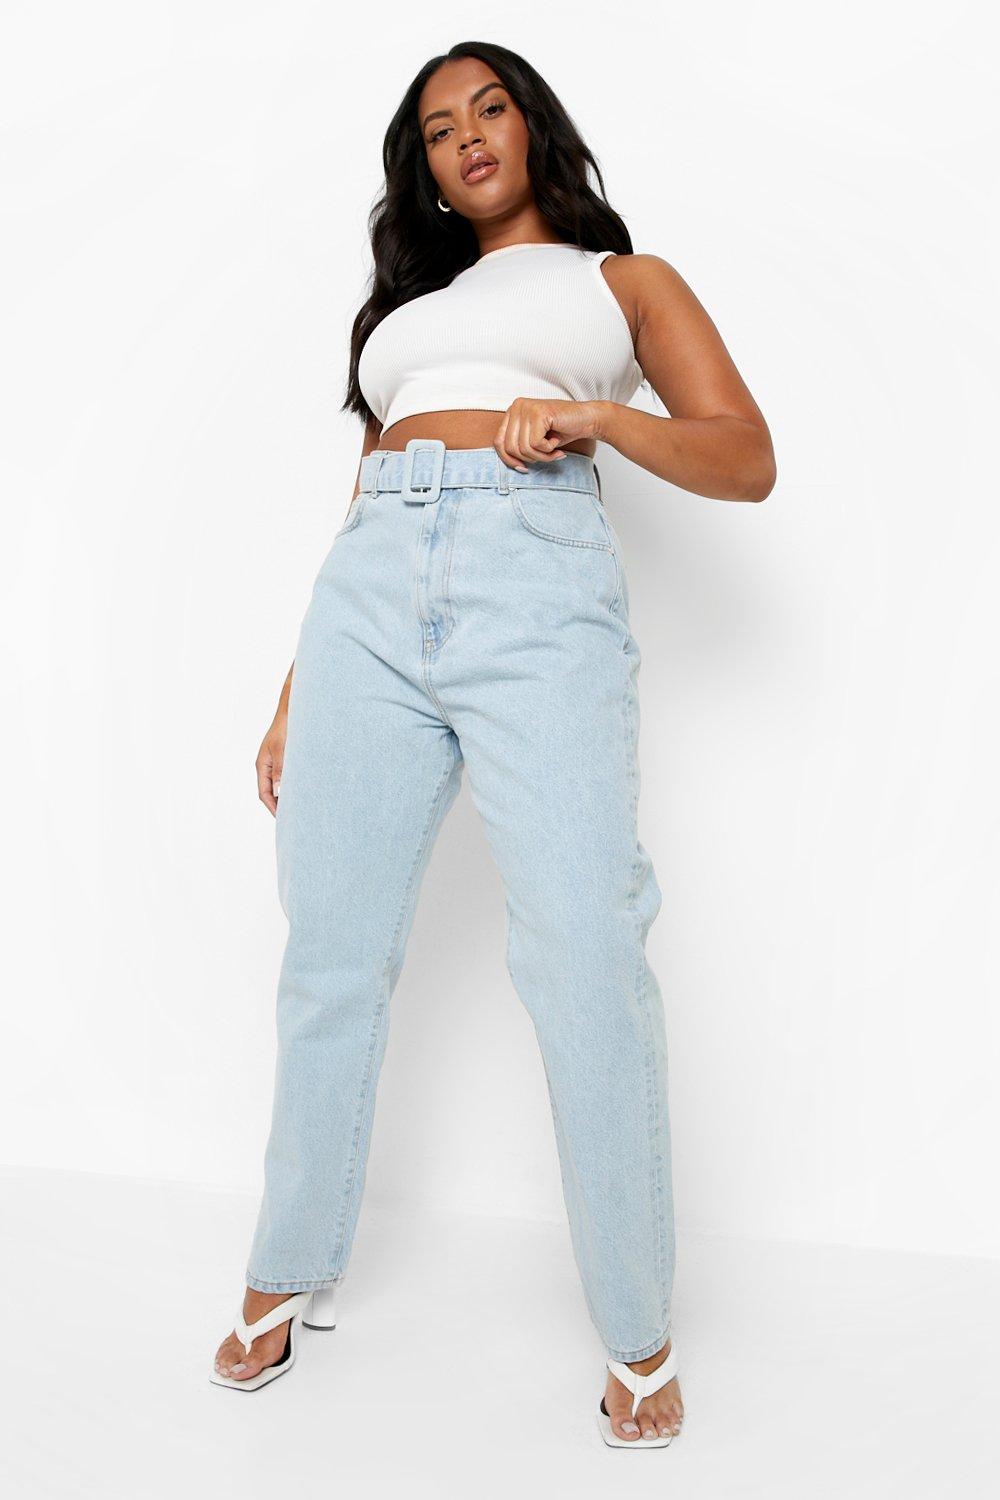 Boohoo Plus Self Fabric Buckle Belted Tapered Jean, Light Wash